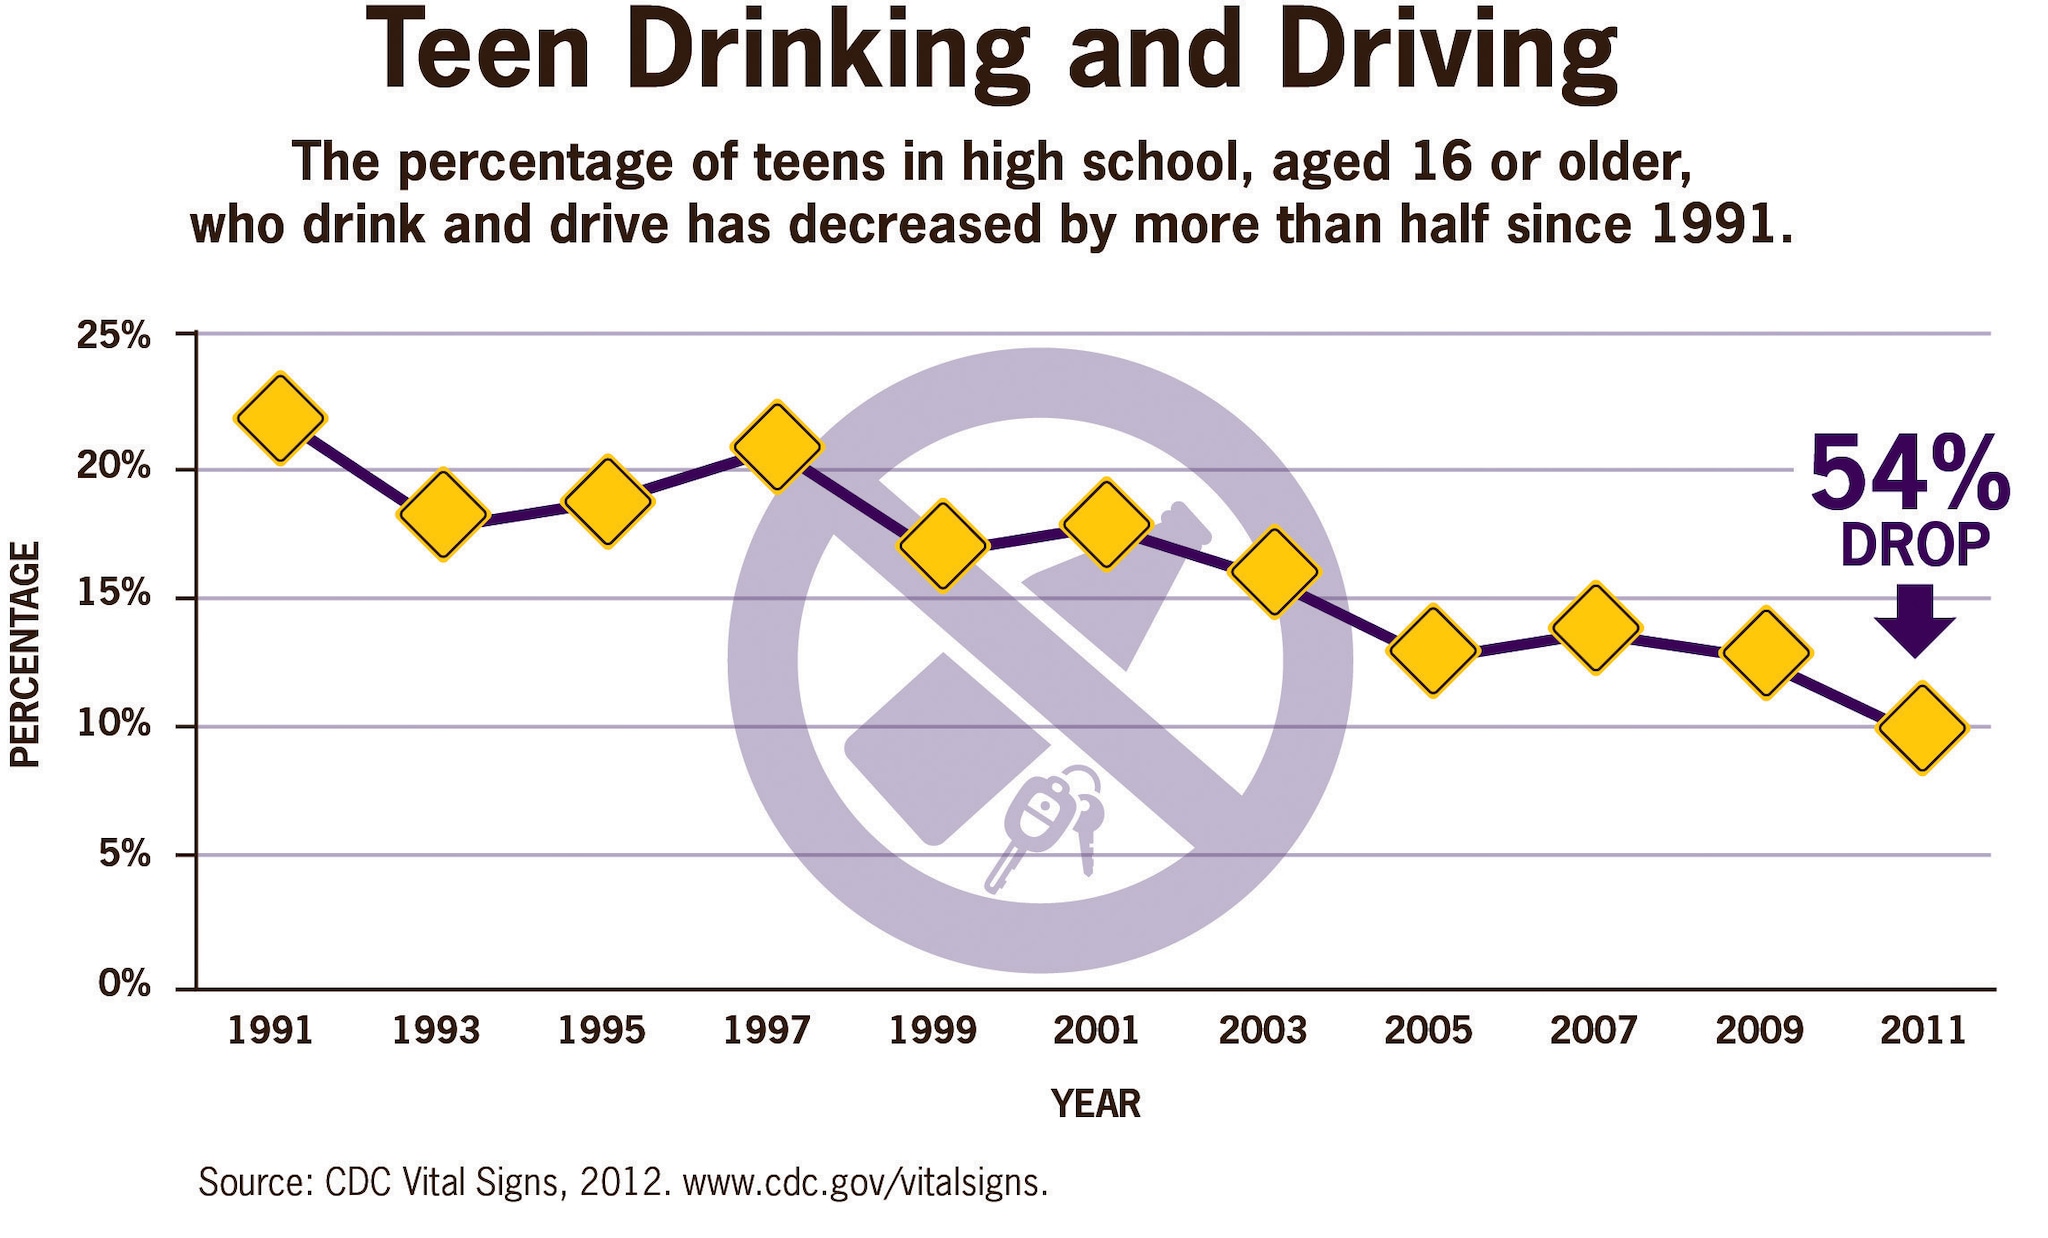 The percentage of teens in high school, aged 16 years or older, who drink and drive has decreased by more than half from 1991 to 2011 (54% drop).